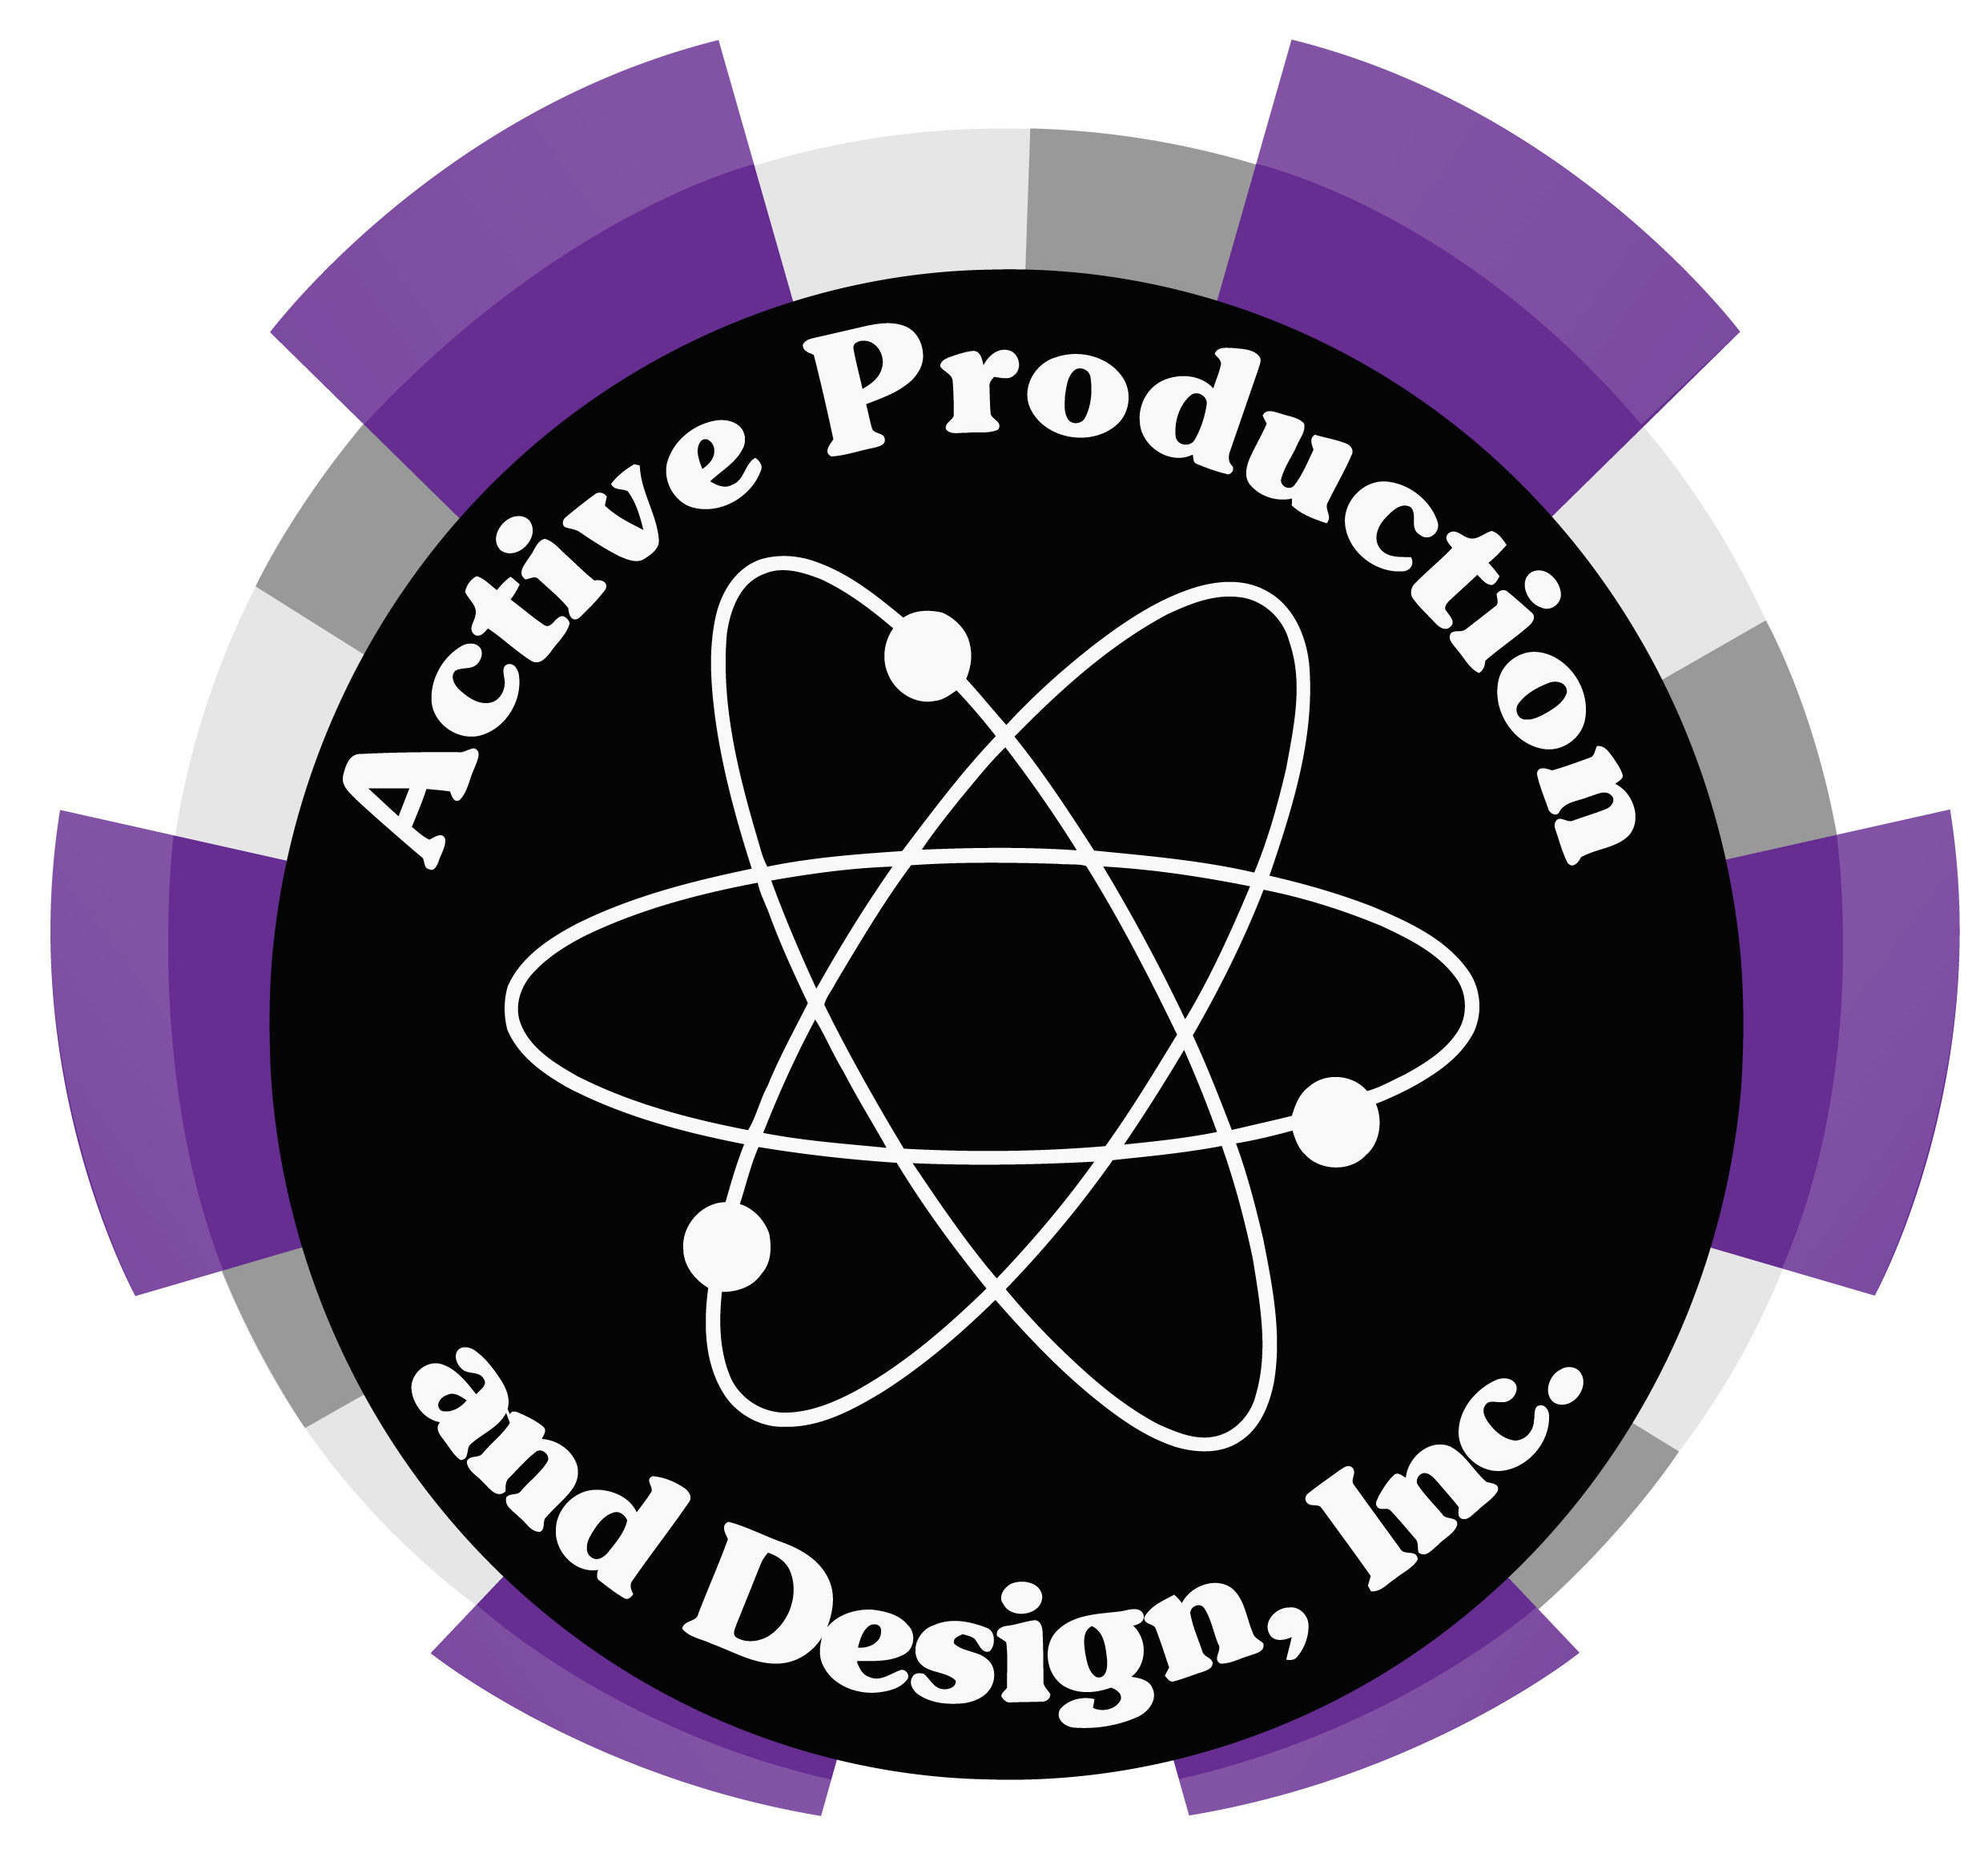 Active Production and Design